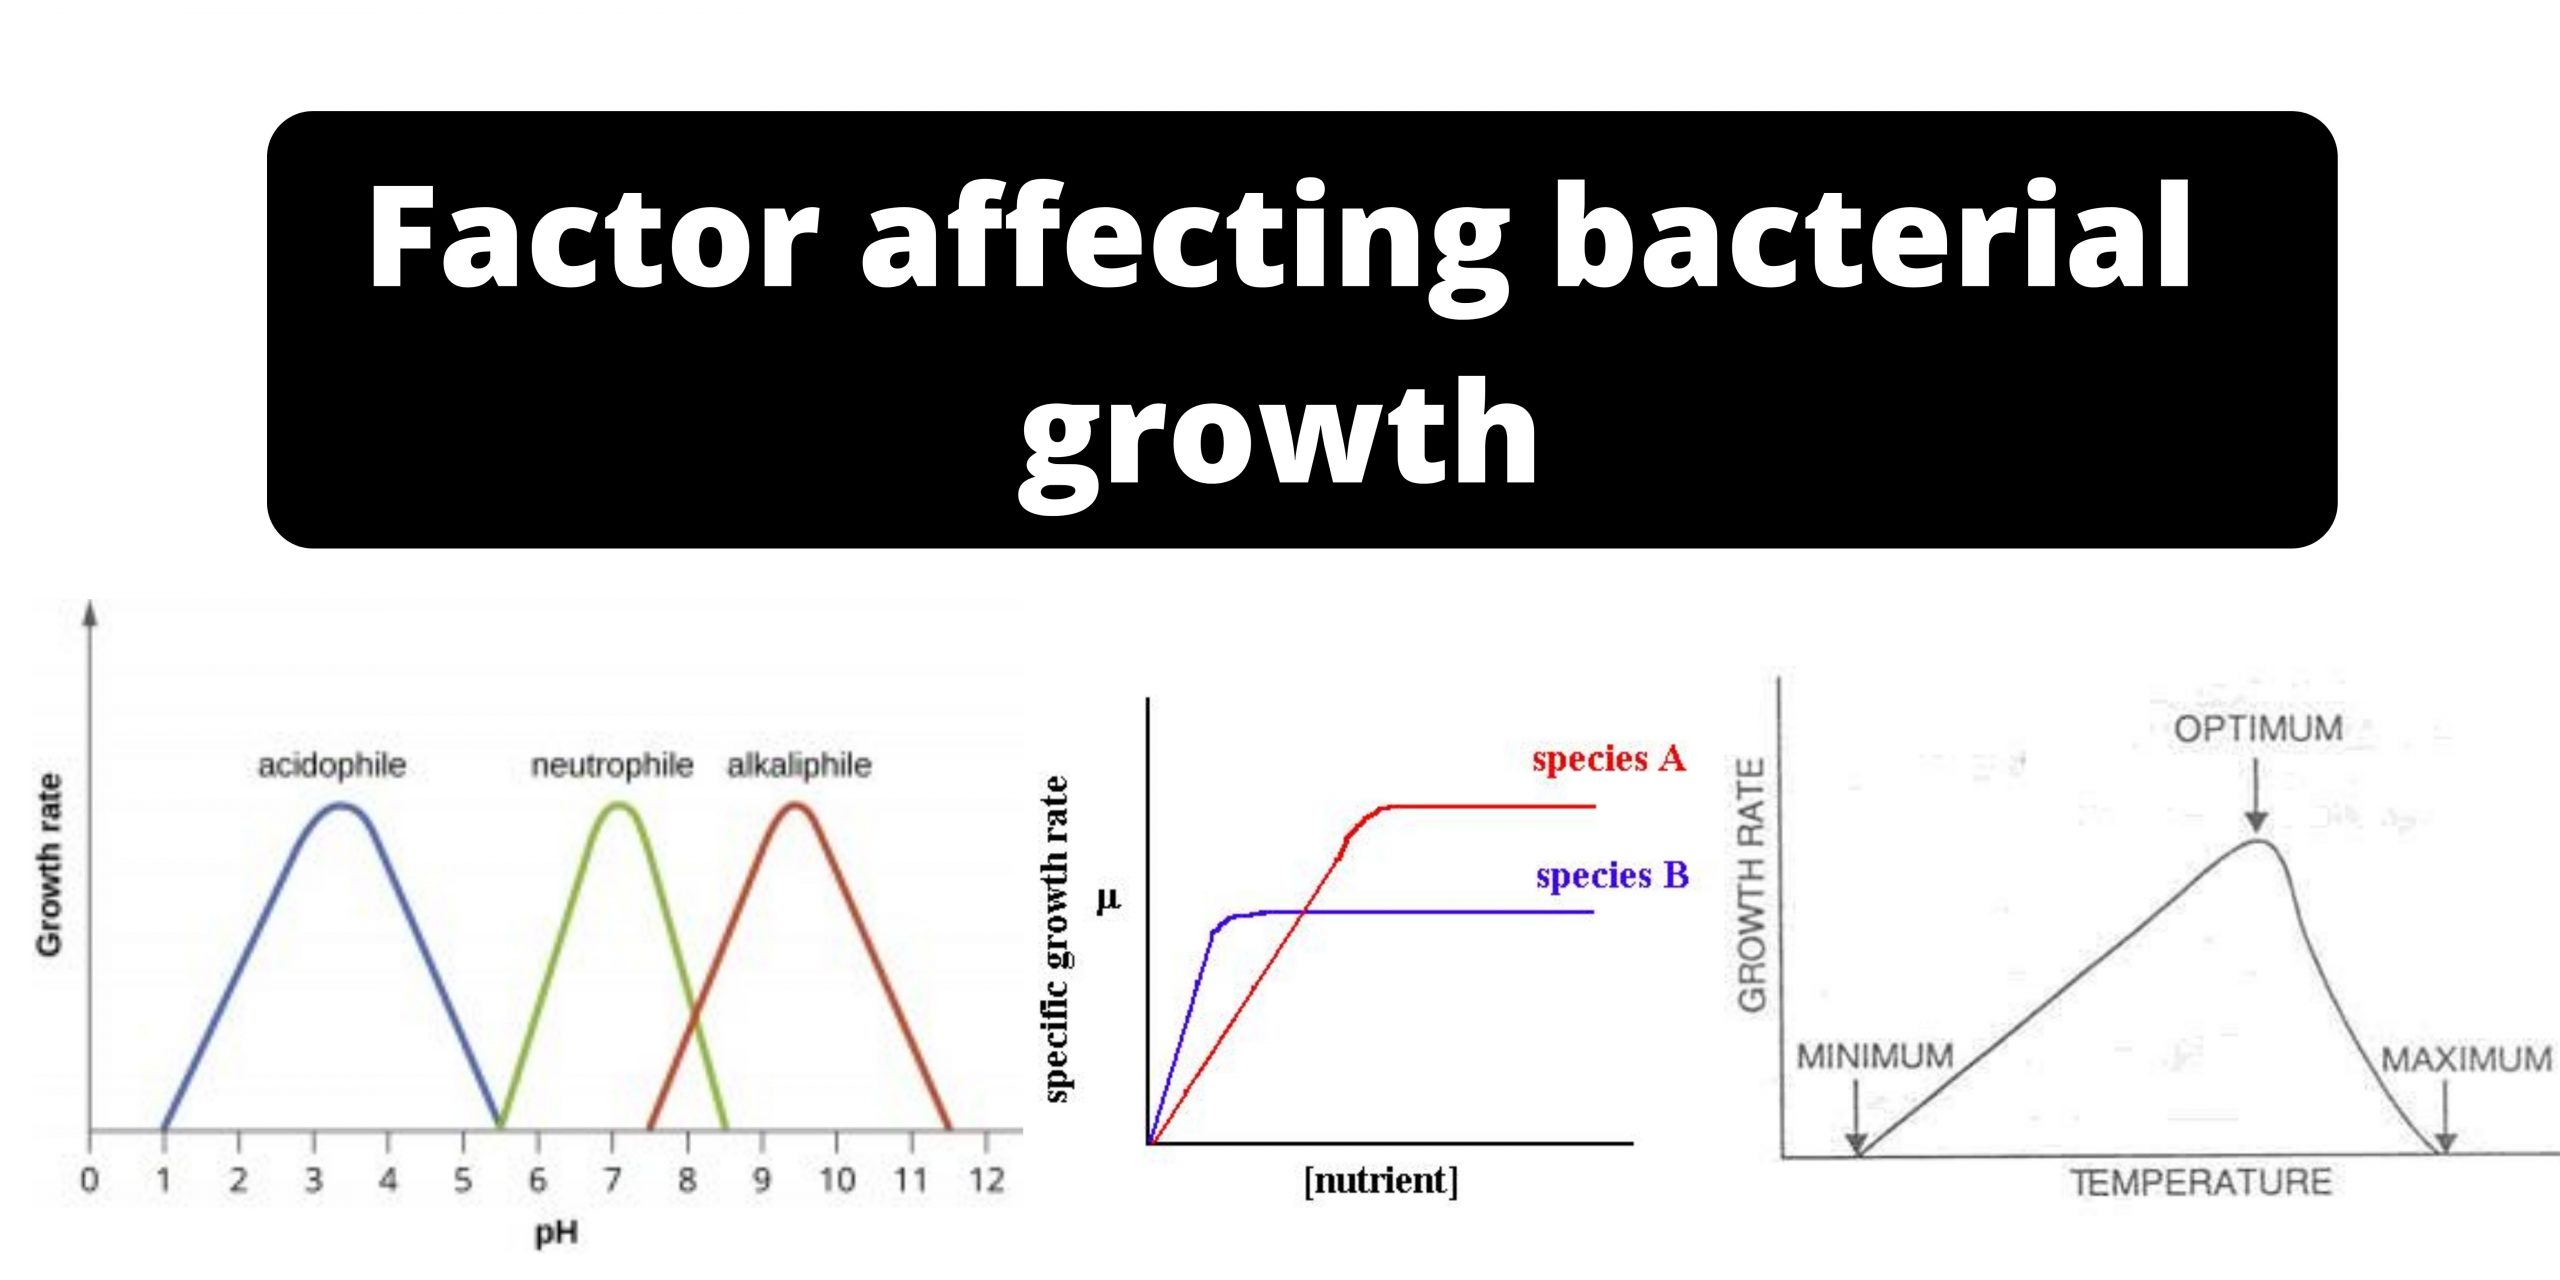 Factor affecting bacterial growth